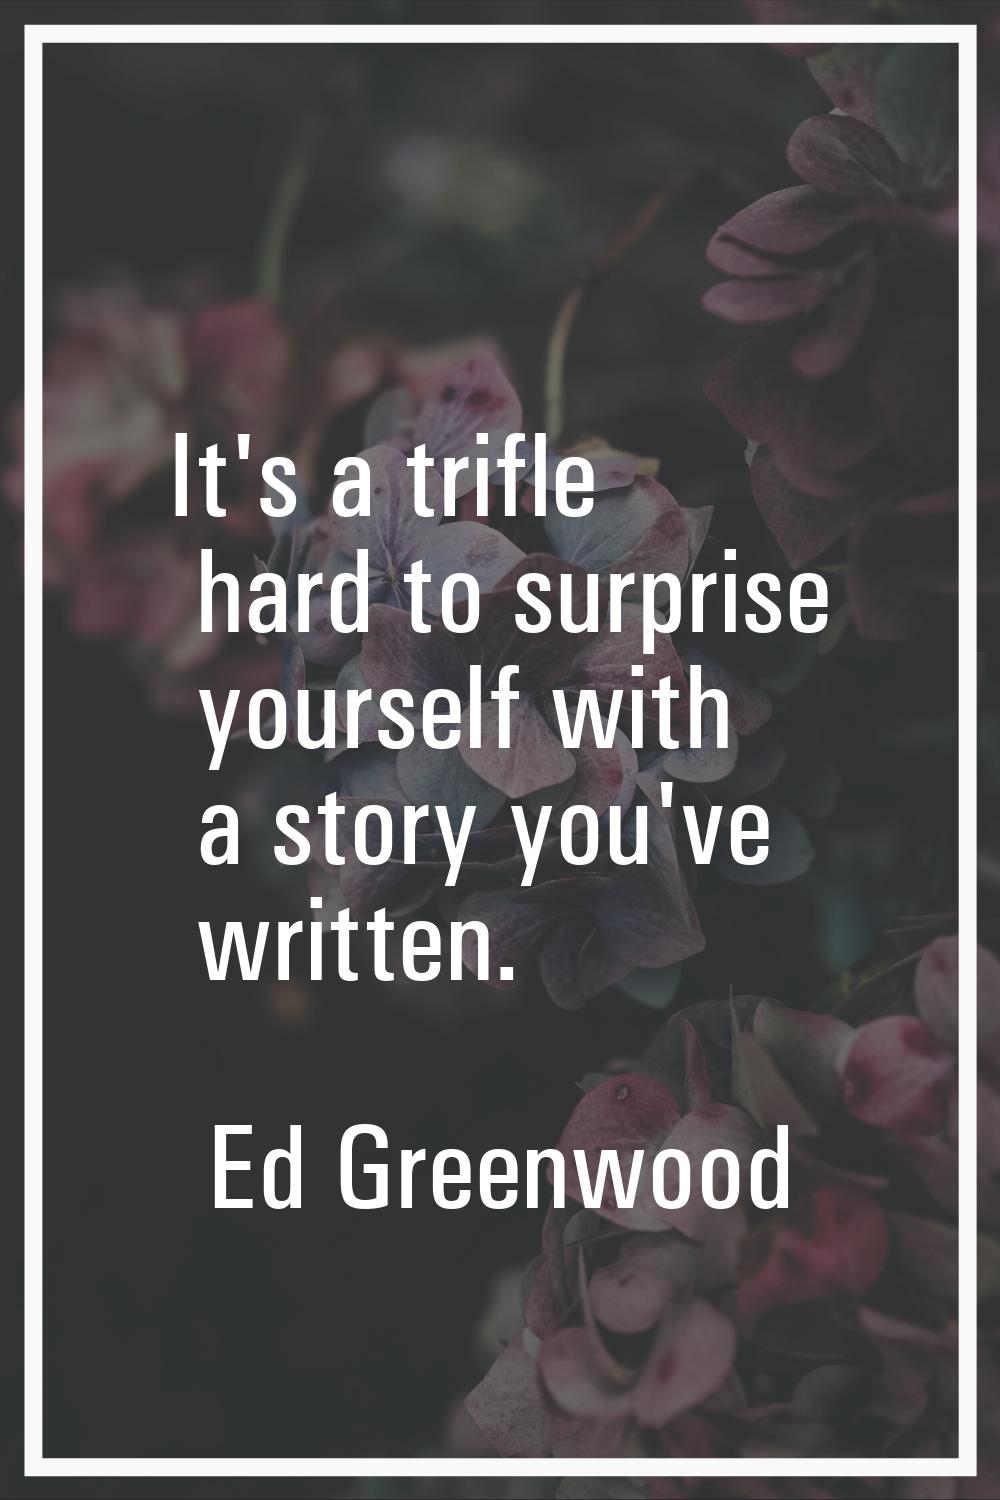 It's a trifle hard to surprise yourself with a story you've written.